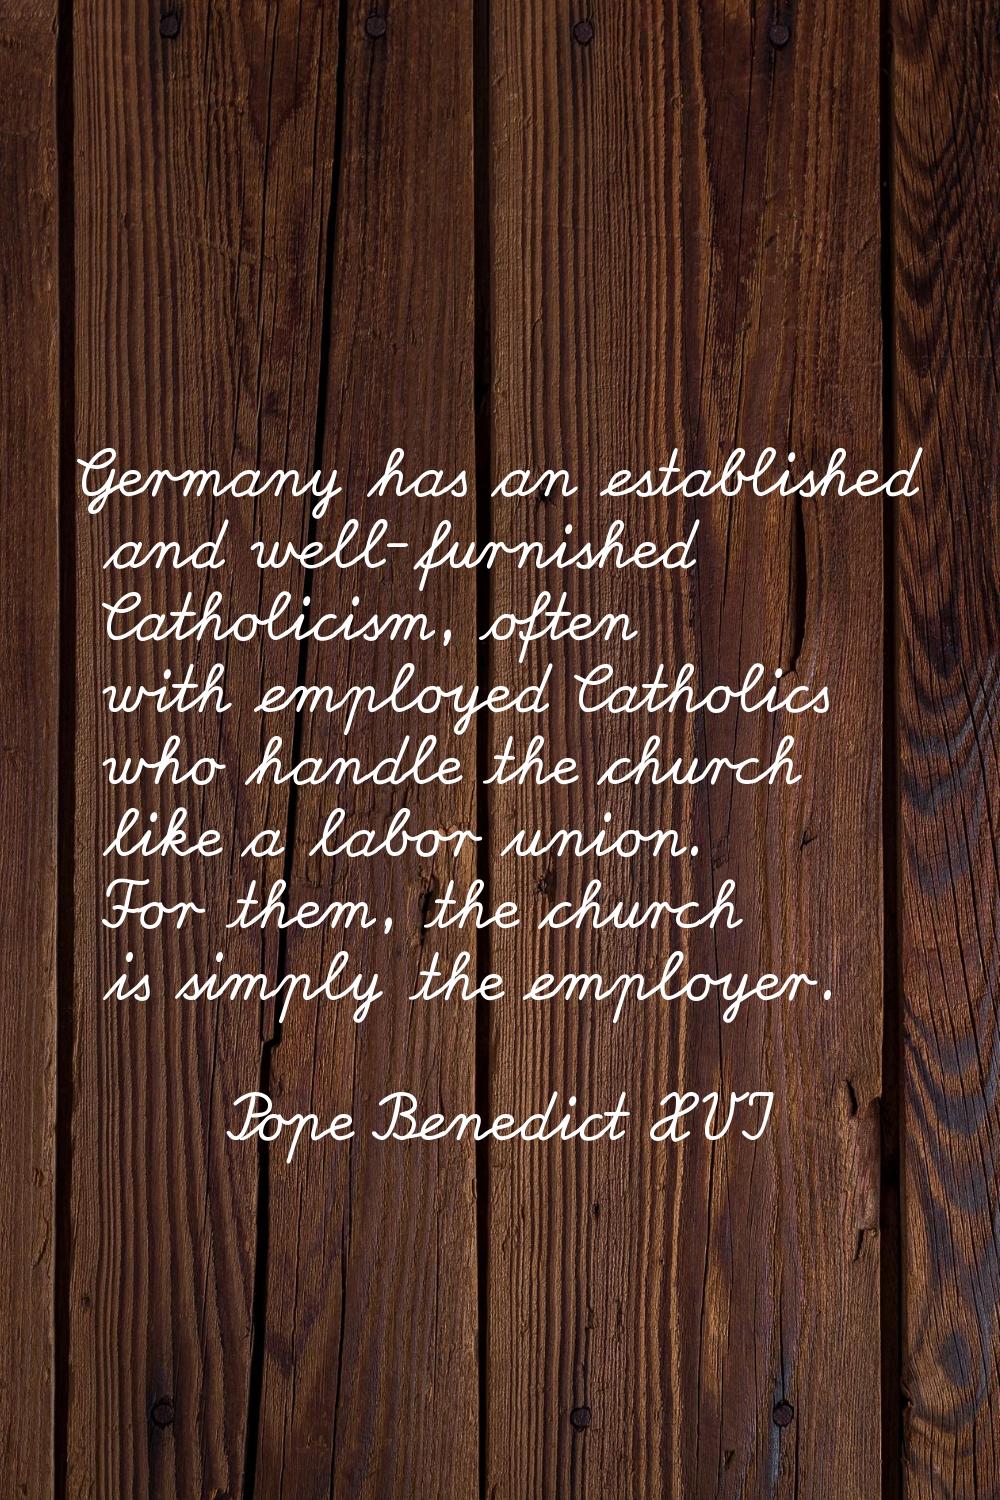 Germany has an established and well-furnished Catholicism, often with employed Catholics who handle